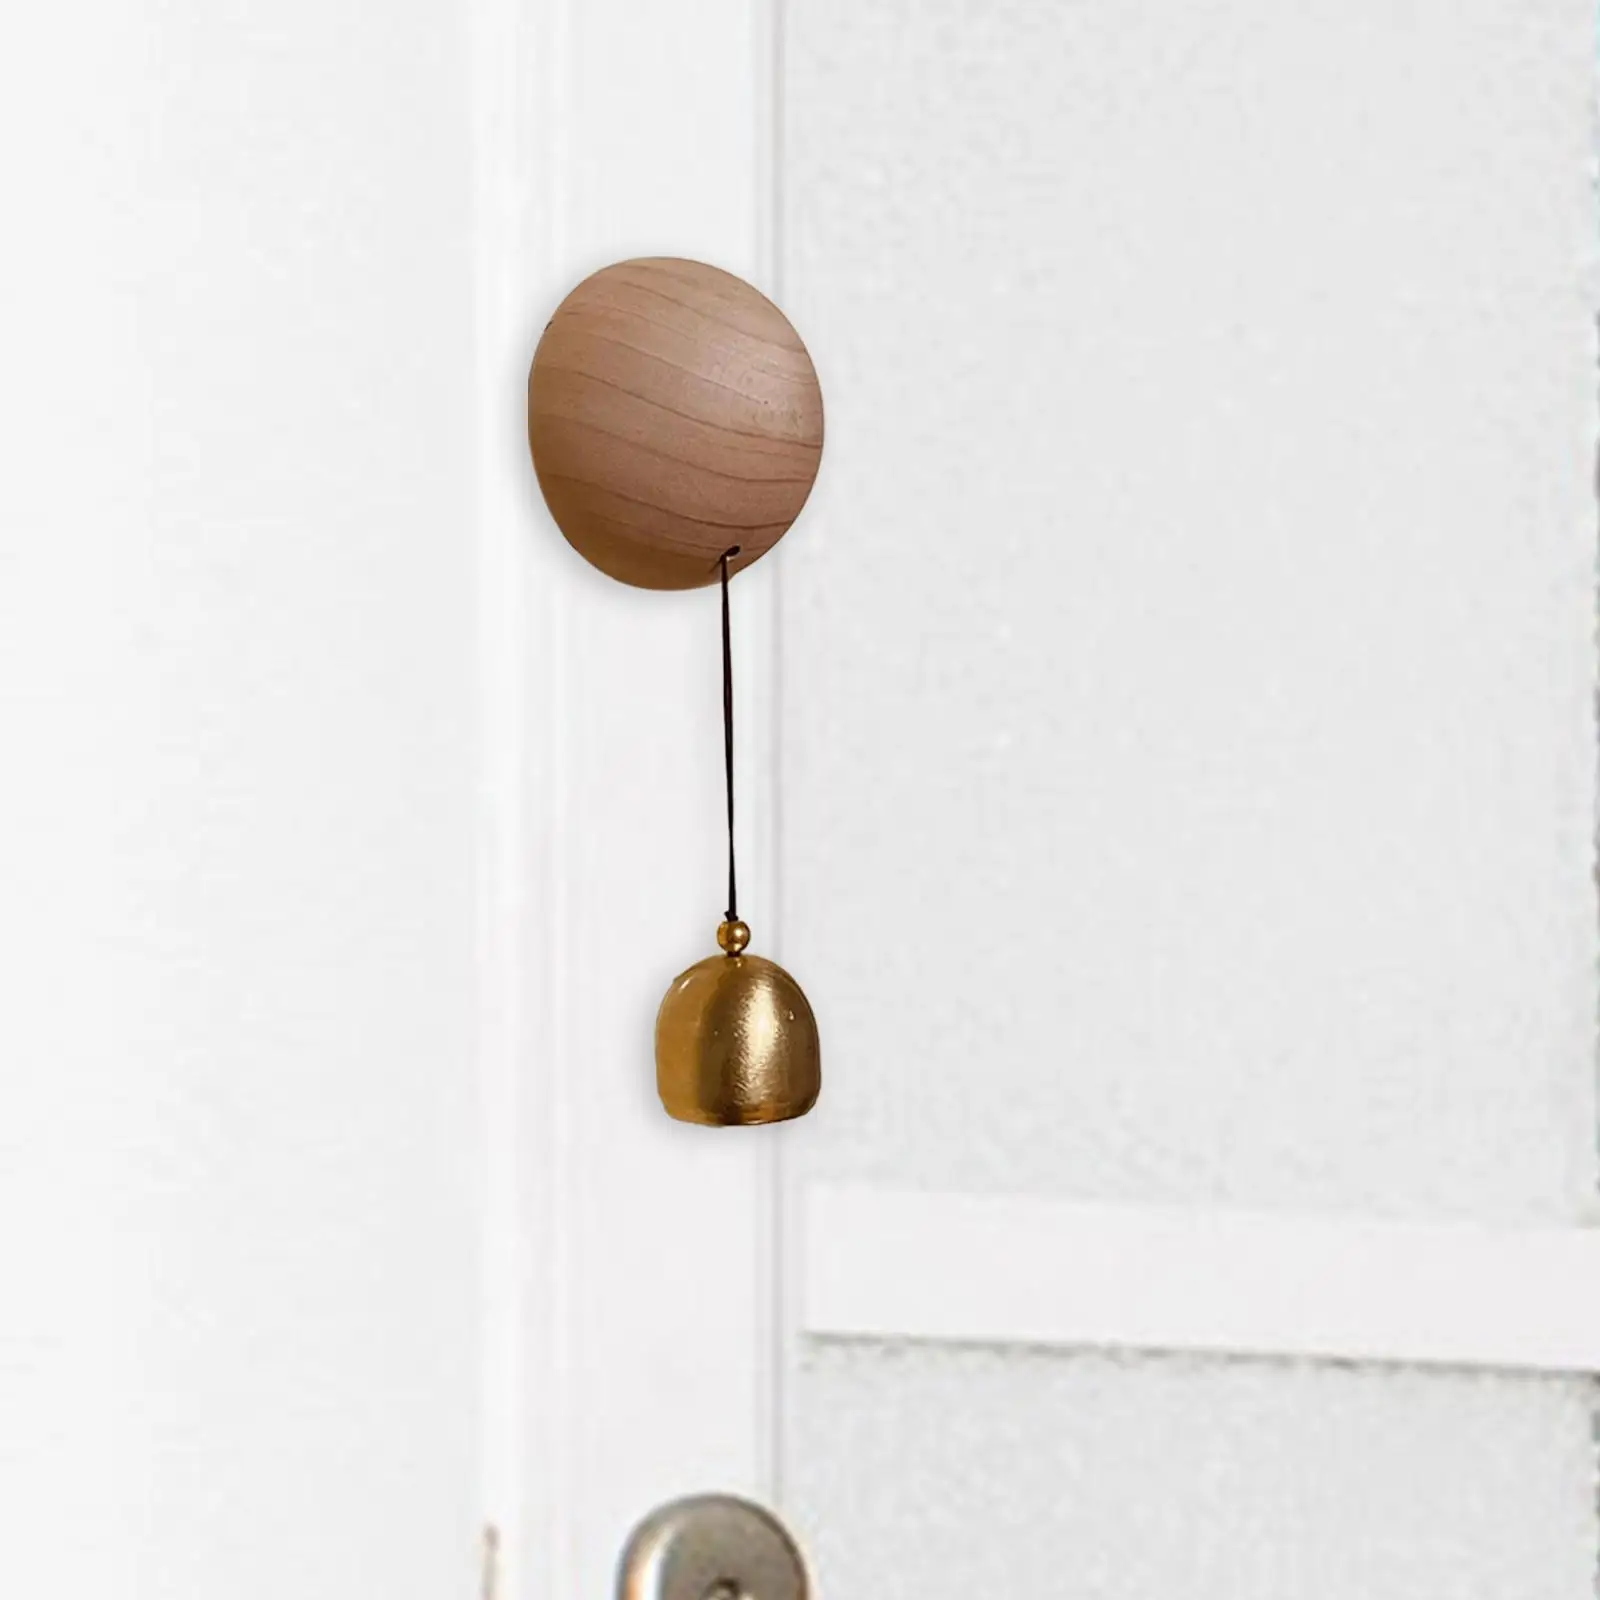 Creative Wind Chime Decorative Hanging Bell Entry Doorbell Shopkeepers Bell for Door Opening for Porch Fridge Coffee Bar